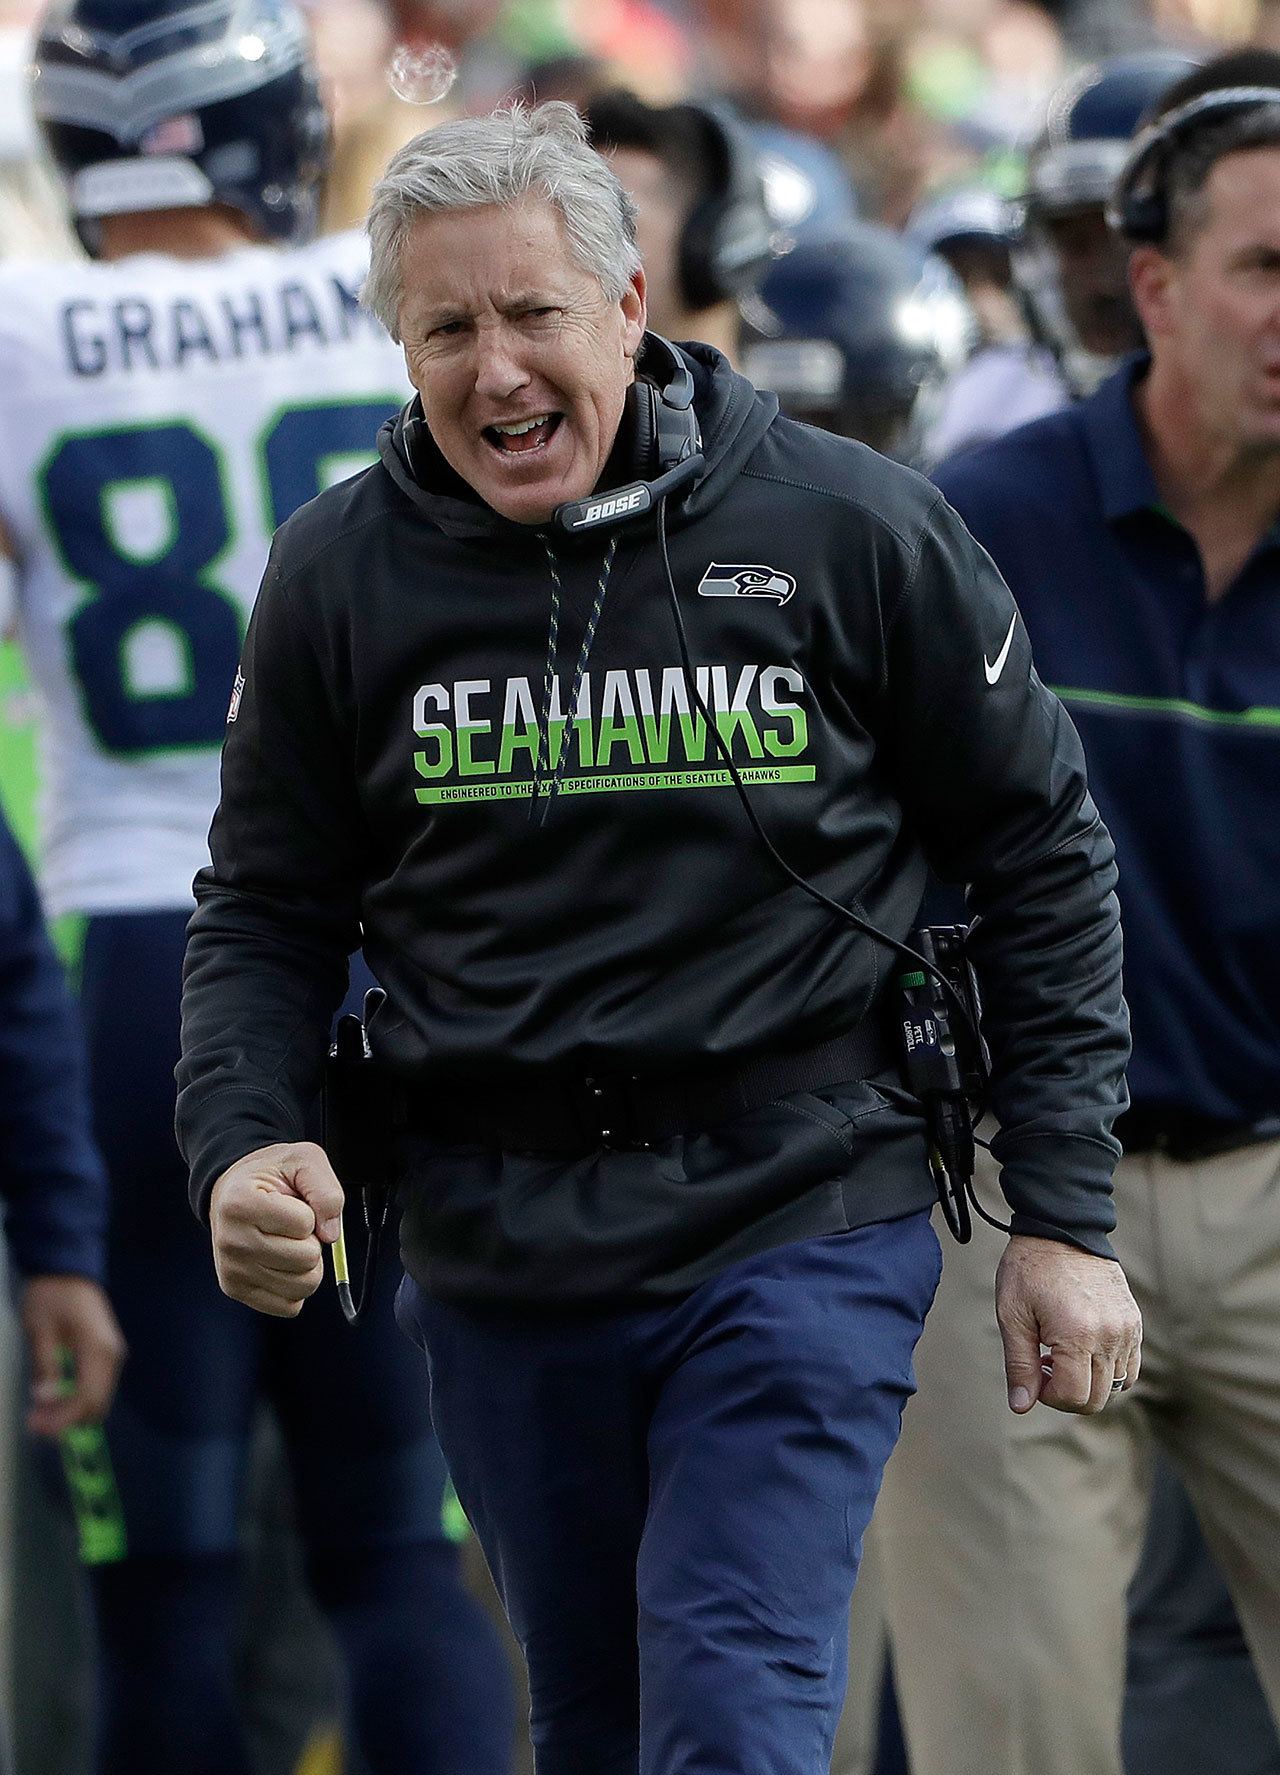 Seahawks head coach Pete Carroll reacts after his team scored a touchdown during the first half of a game against the 49ers this past Sunday in Santa Clara, Calif. (AP Photo/Marcio Jose Sanchez)